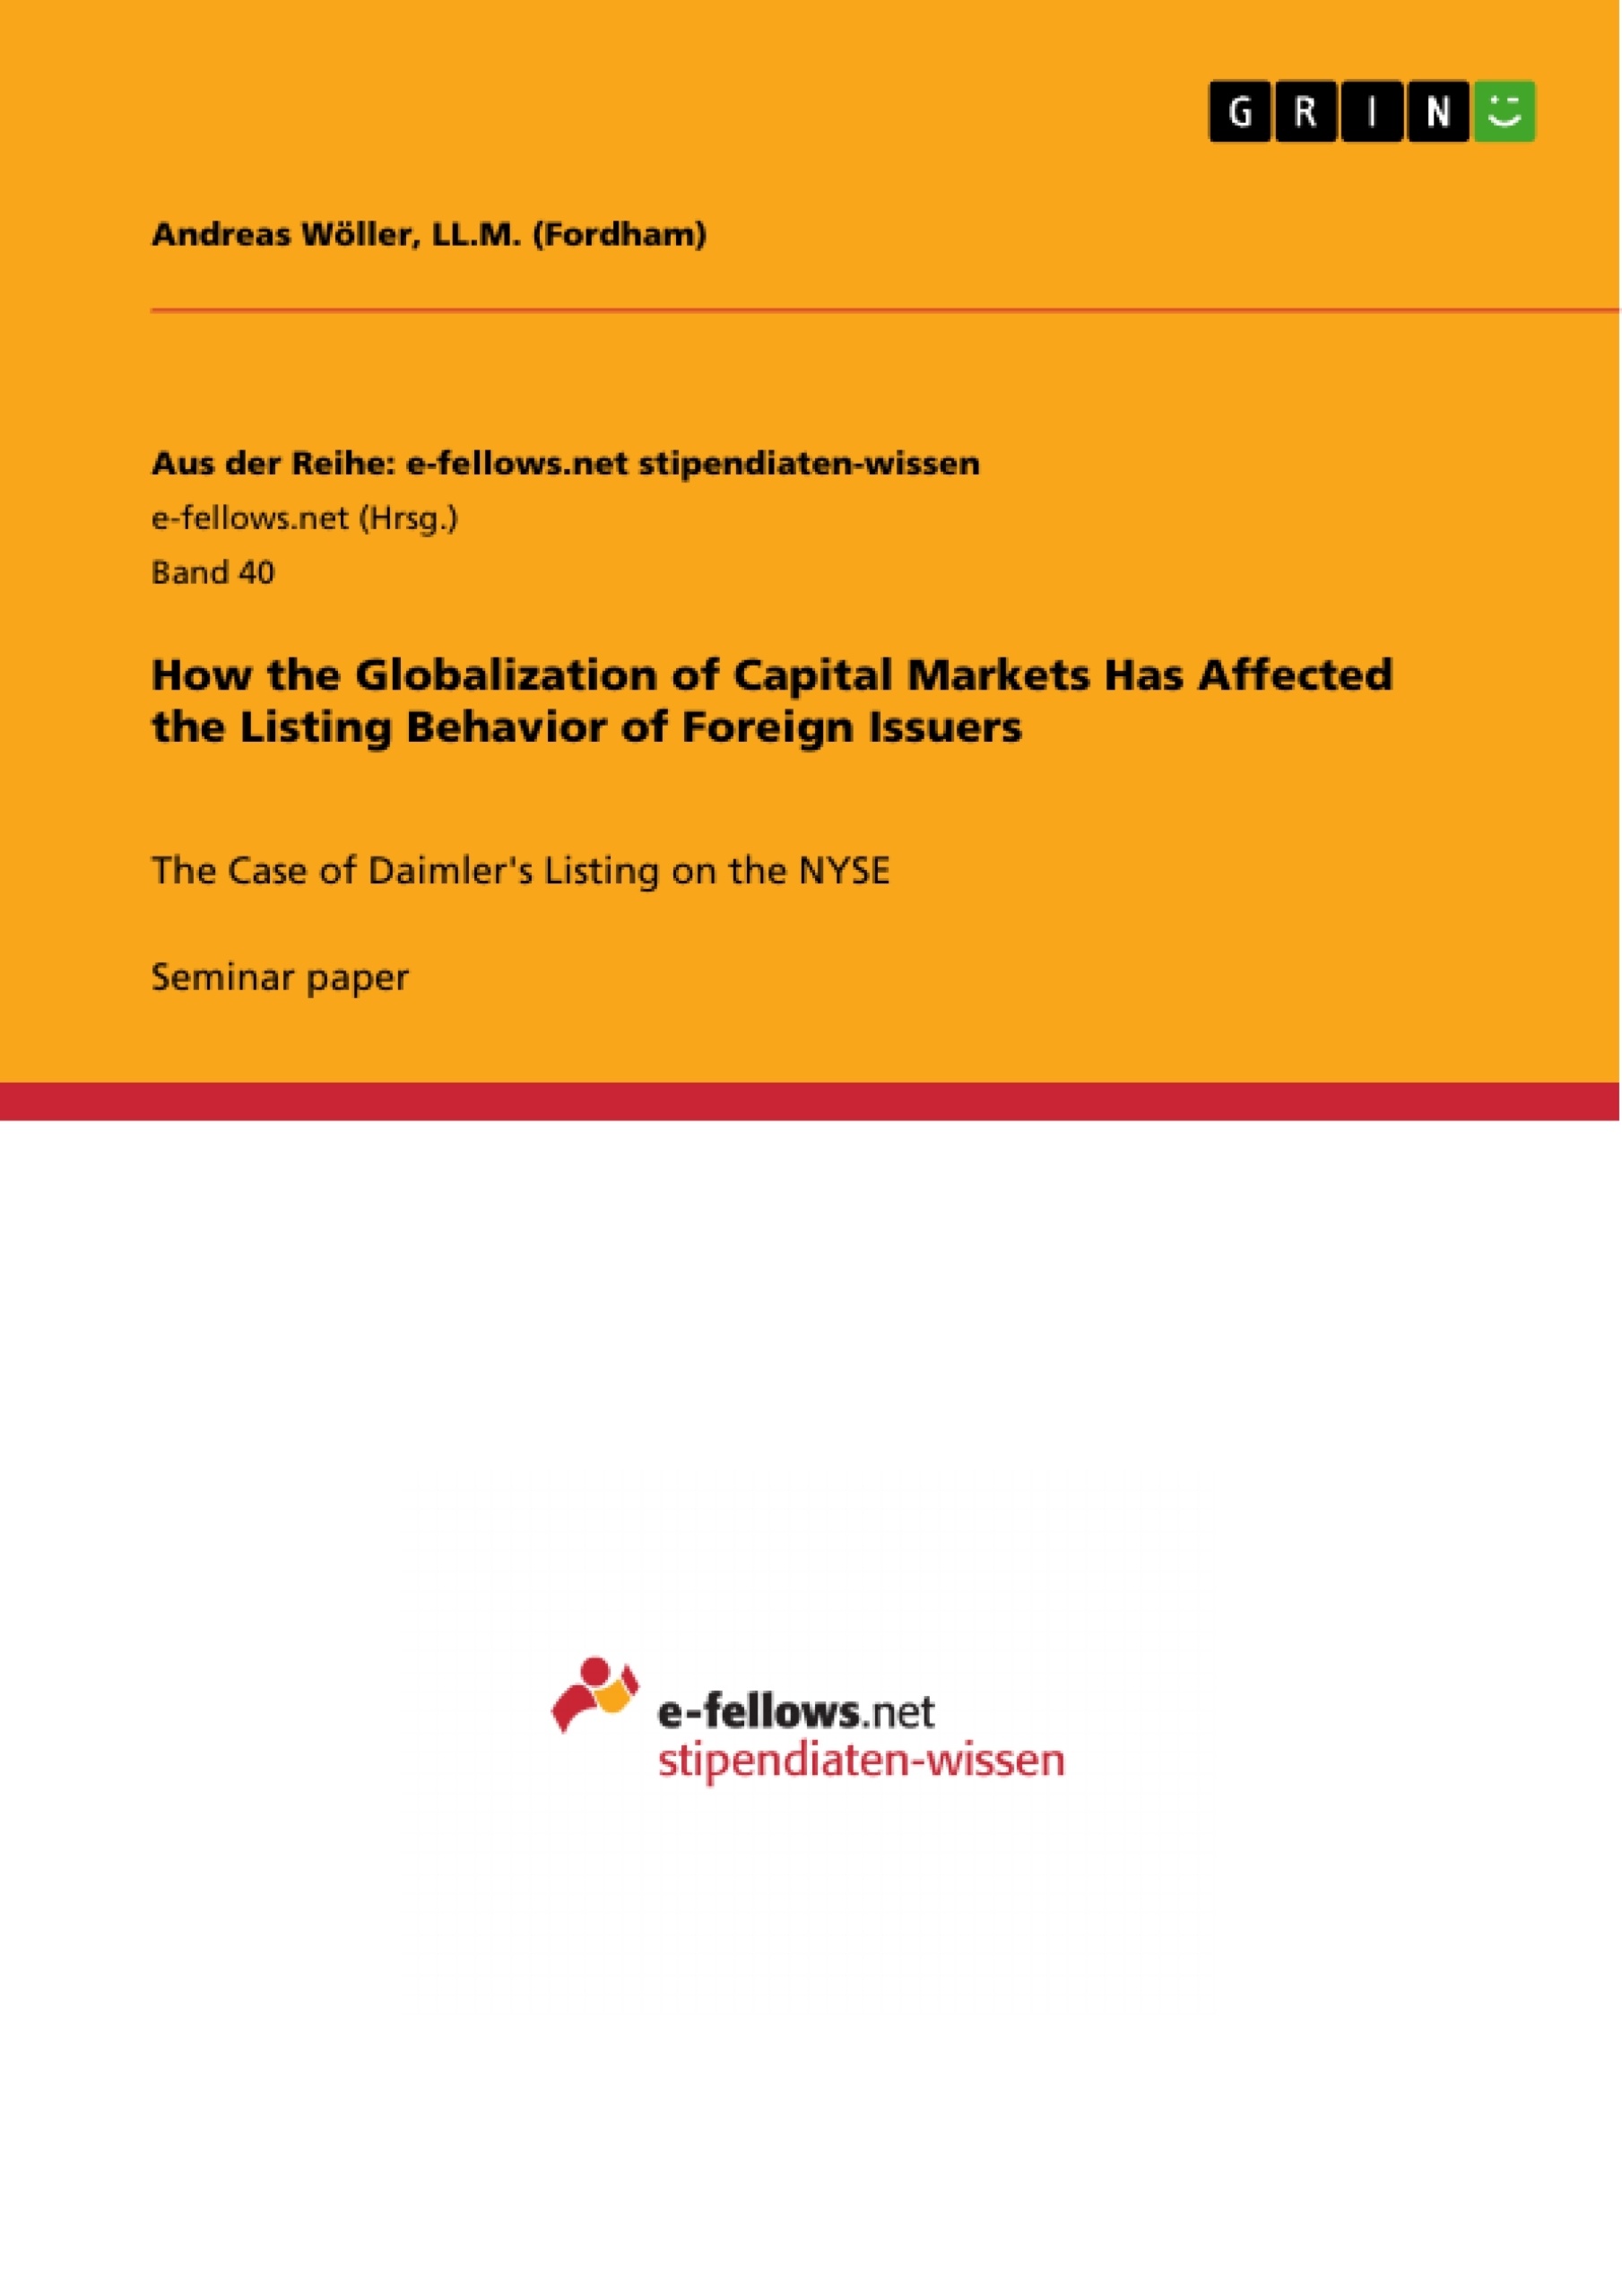 Título: How the Globalization of Capital Markets Has Affected the Listing Behavior of Foreign Issuers